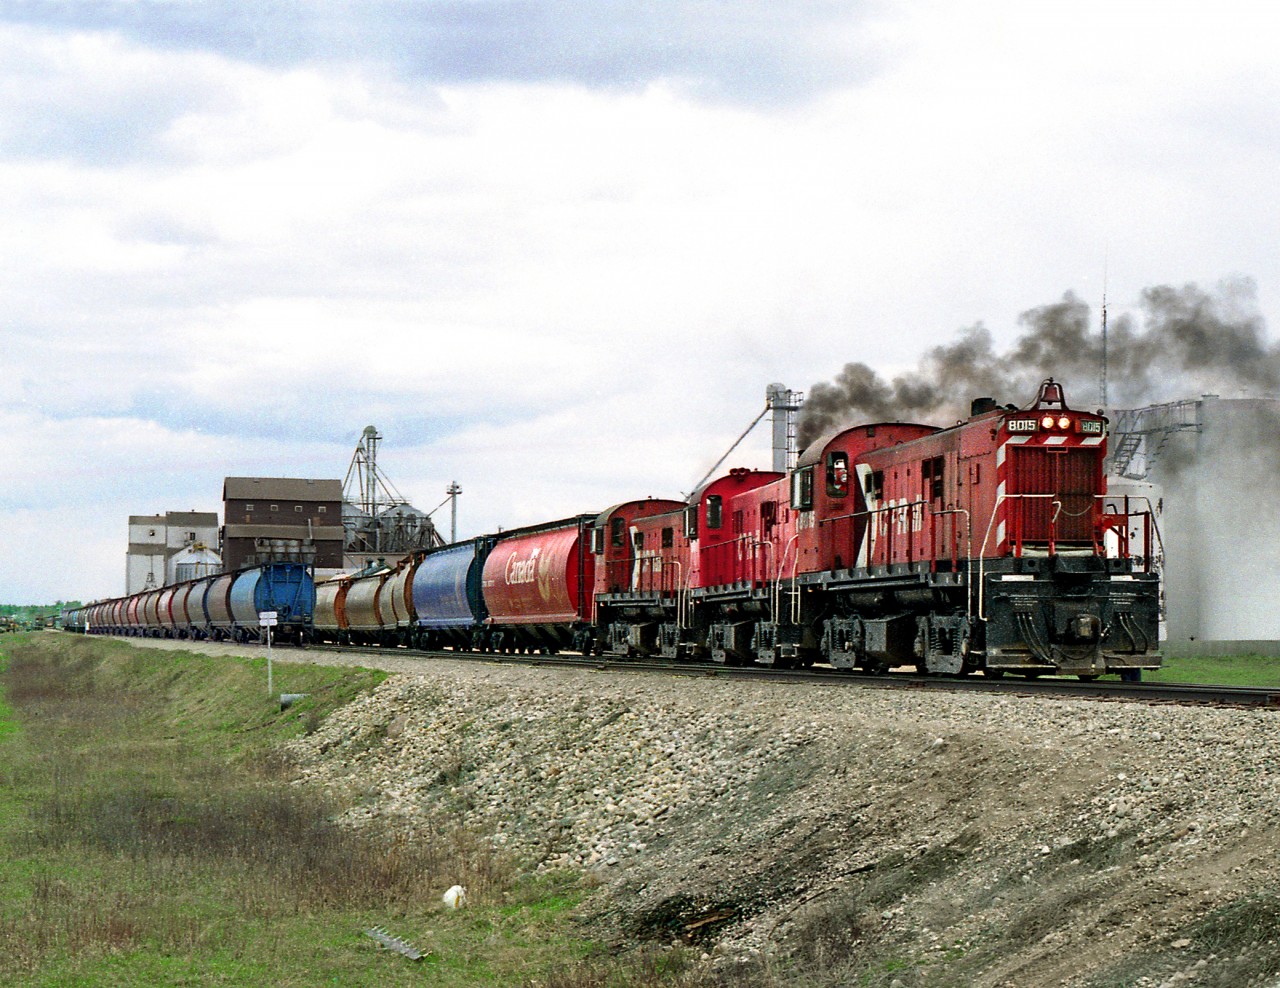 The White Fox Subdivision wayfreight from Prince Albert with 3 RS23's drops its train of grain loads at the south end of Nipawin yard before picking up empties to spot on return trip. The loads will eventually move south via Sheho and connection with the CP's north main. This was done rather than moving traffic via Prince Albert to avoid per axle running right charges on CN